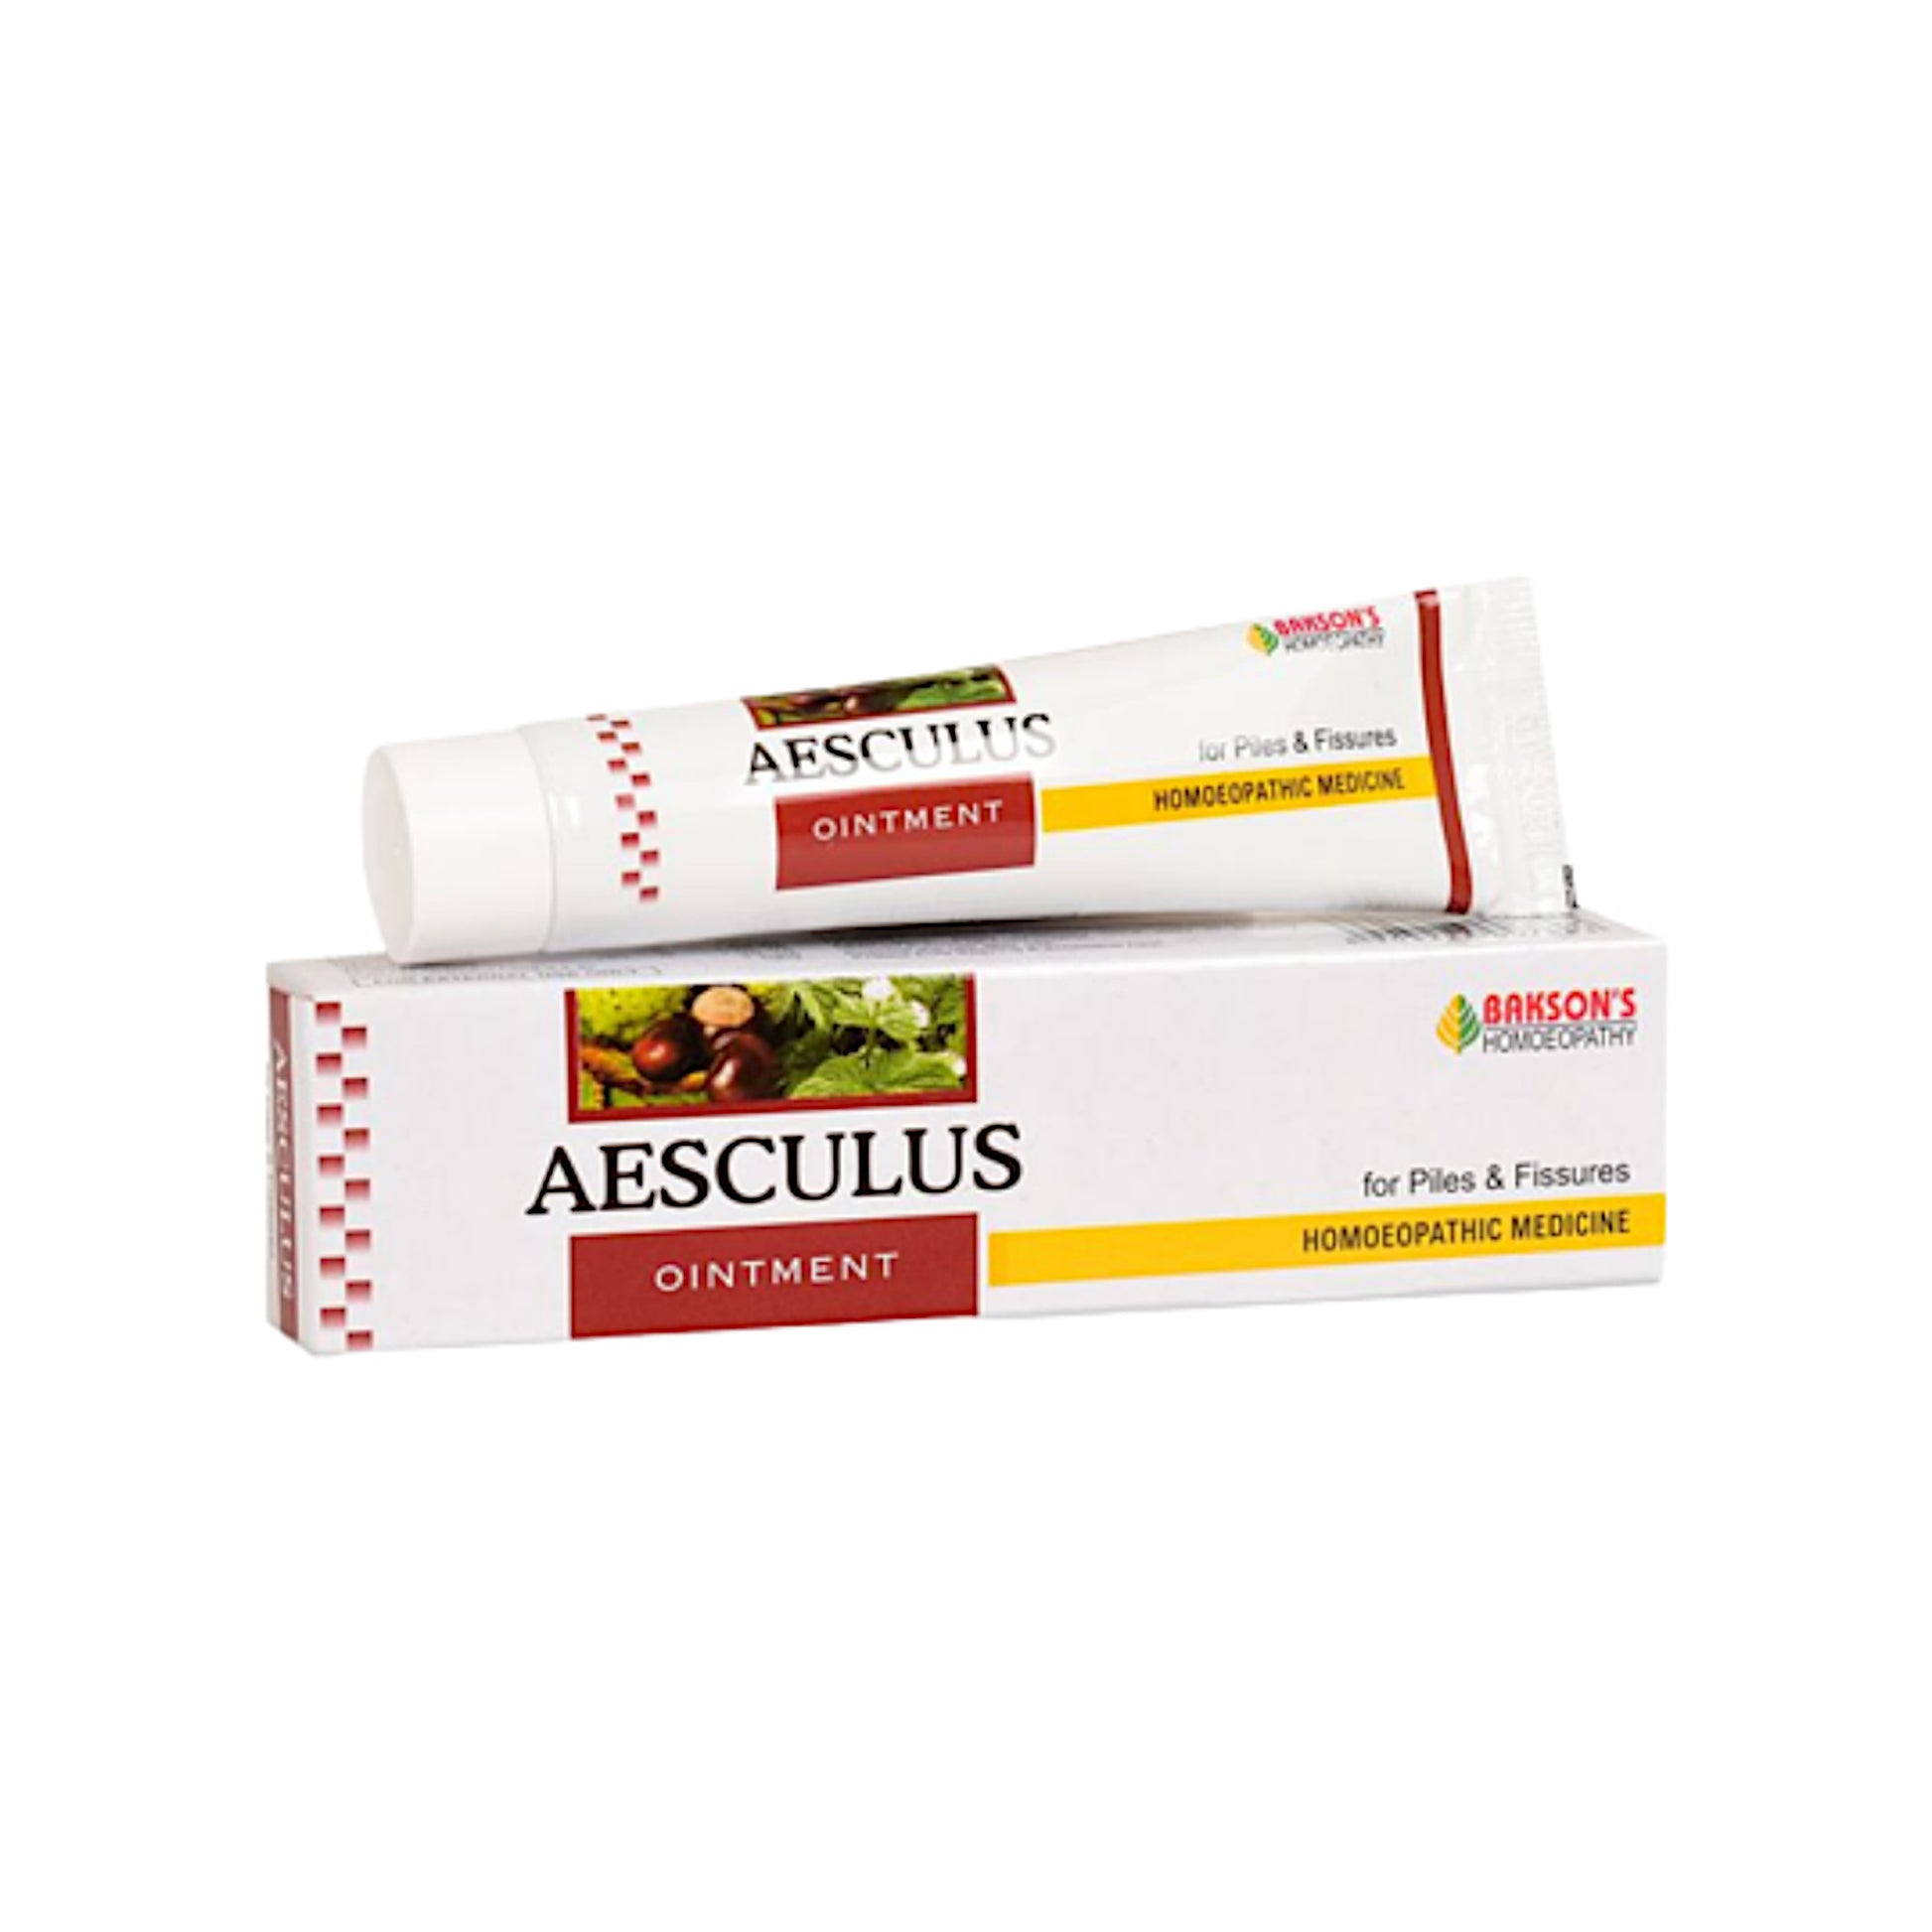 Image Bakson's Aesculus Ointment 25 g:  Homeopathic relief for hemorrhoids and venous health.